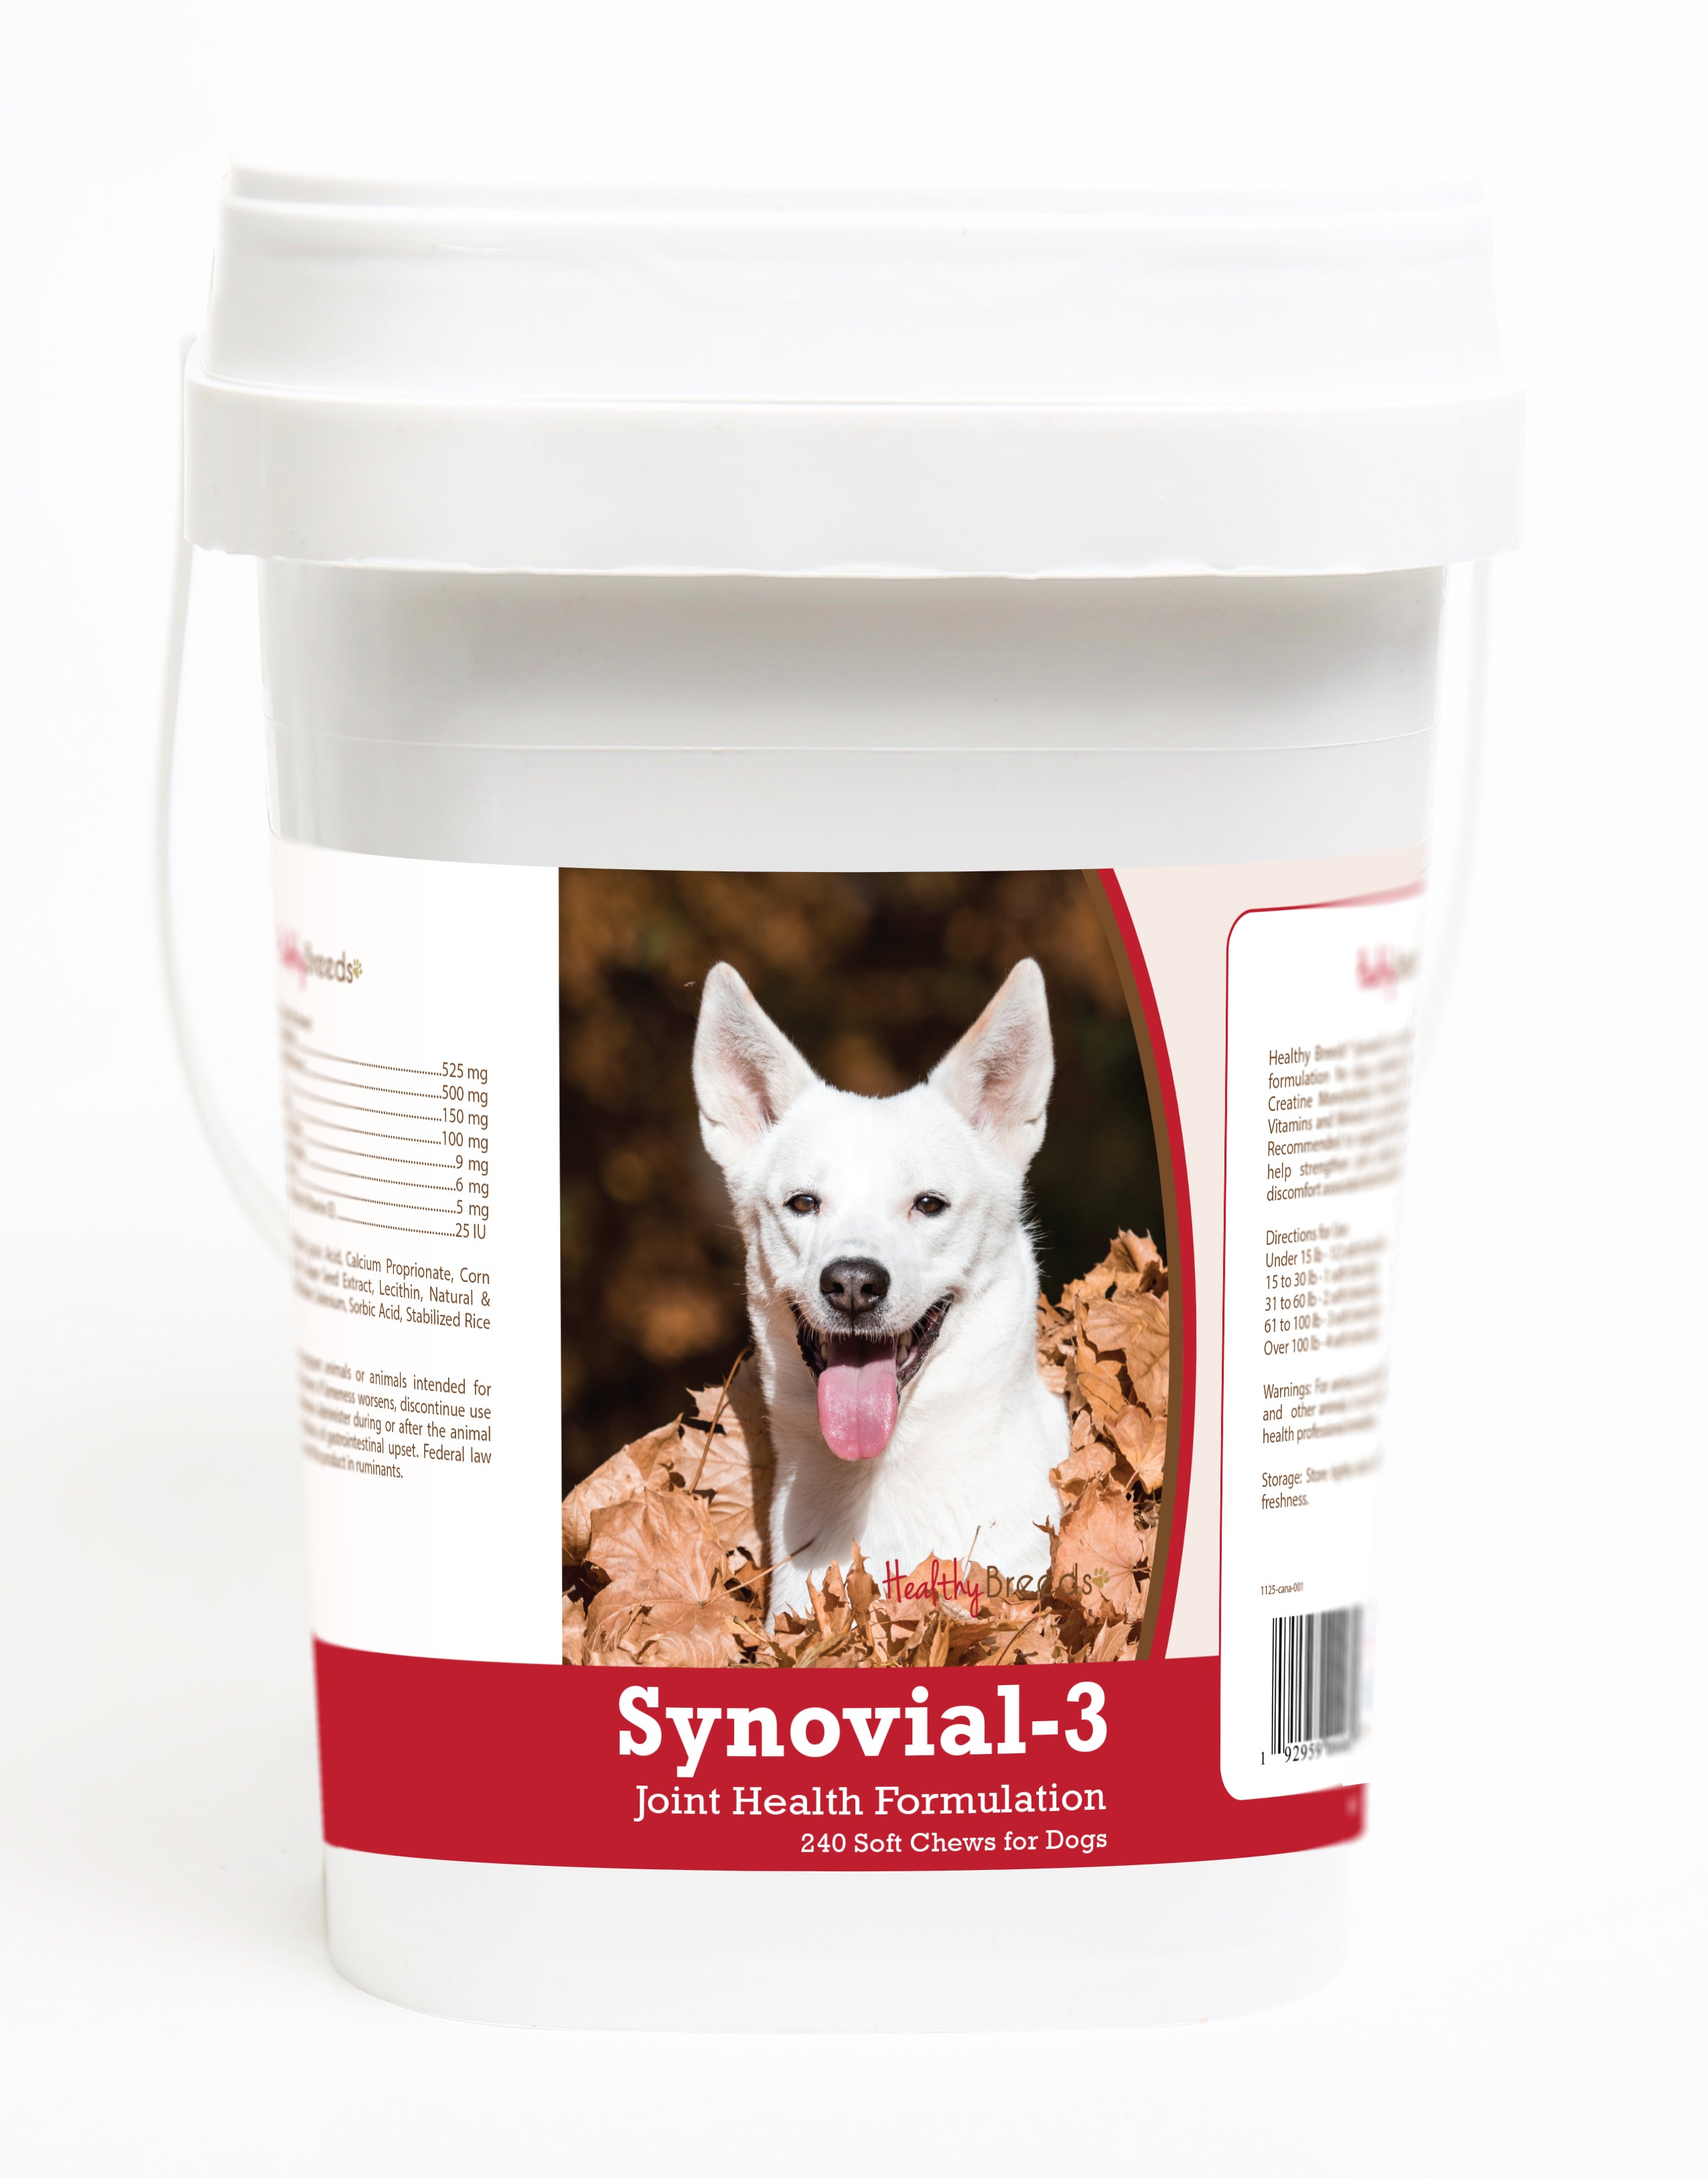 Canaan Dog Synovial-3 Joint Health Formulation Soft Chews 240 Count